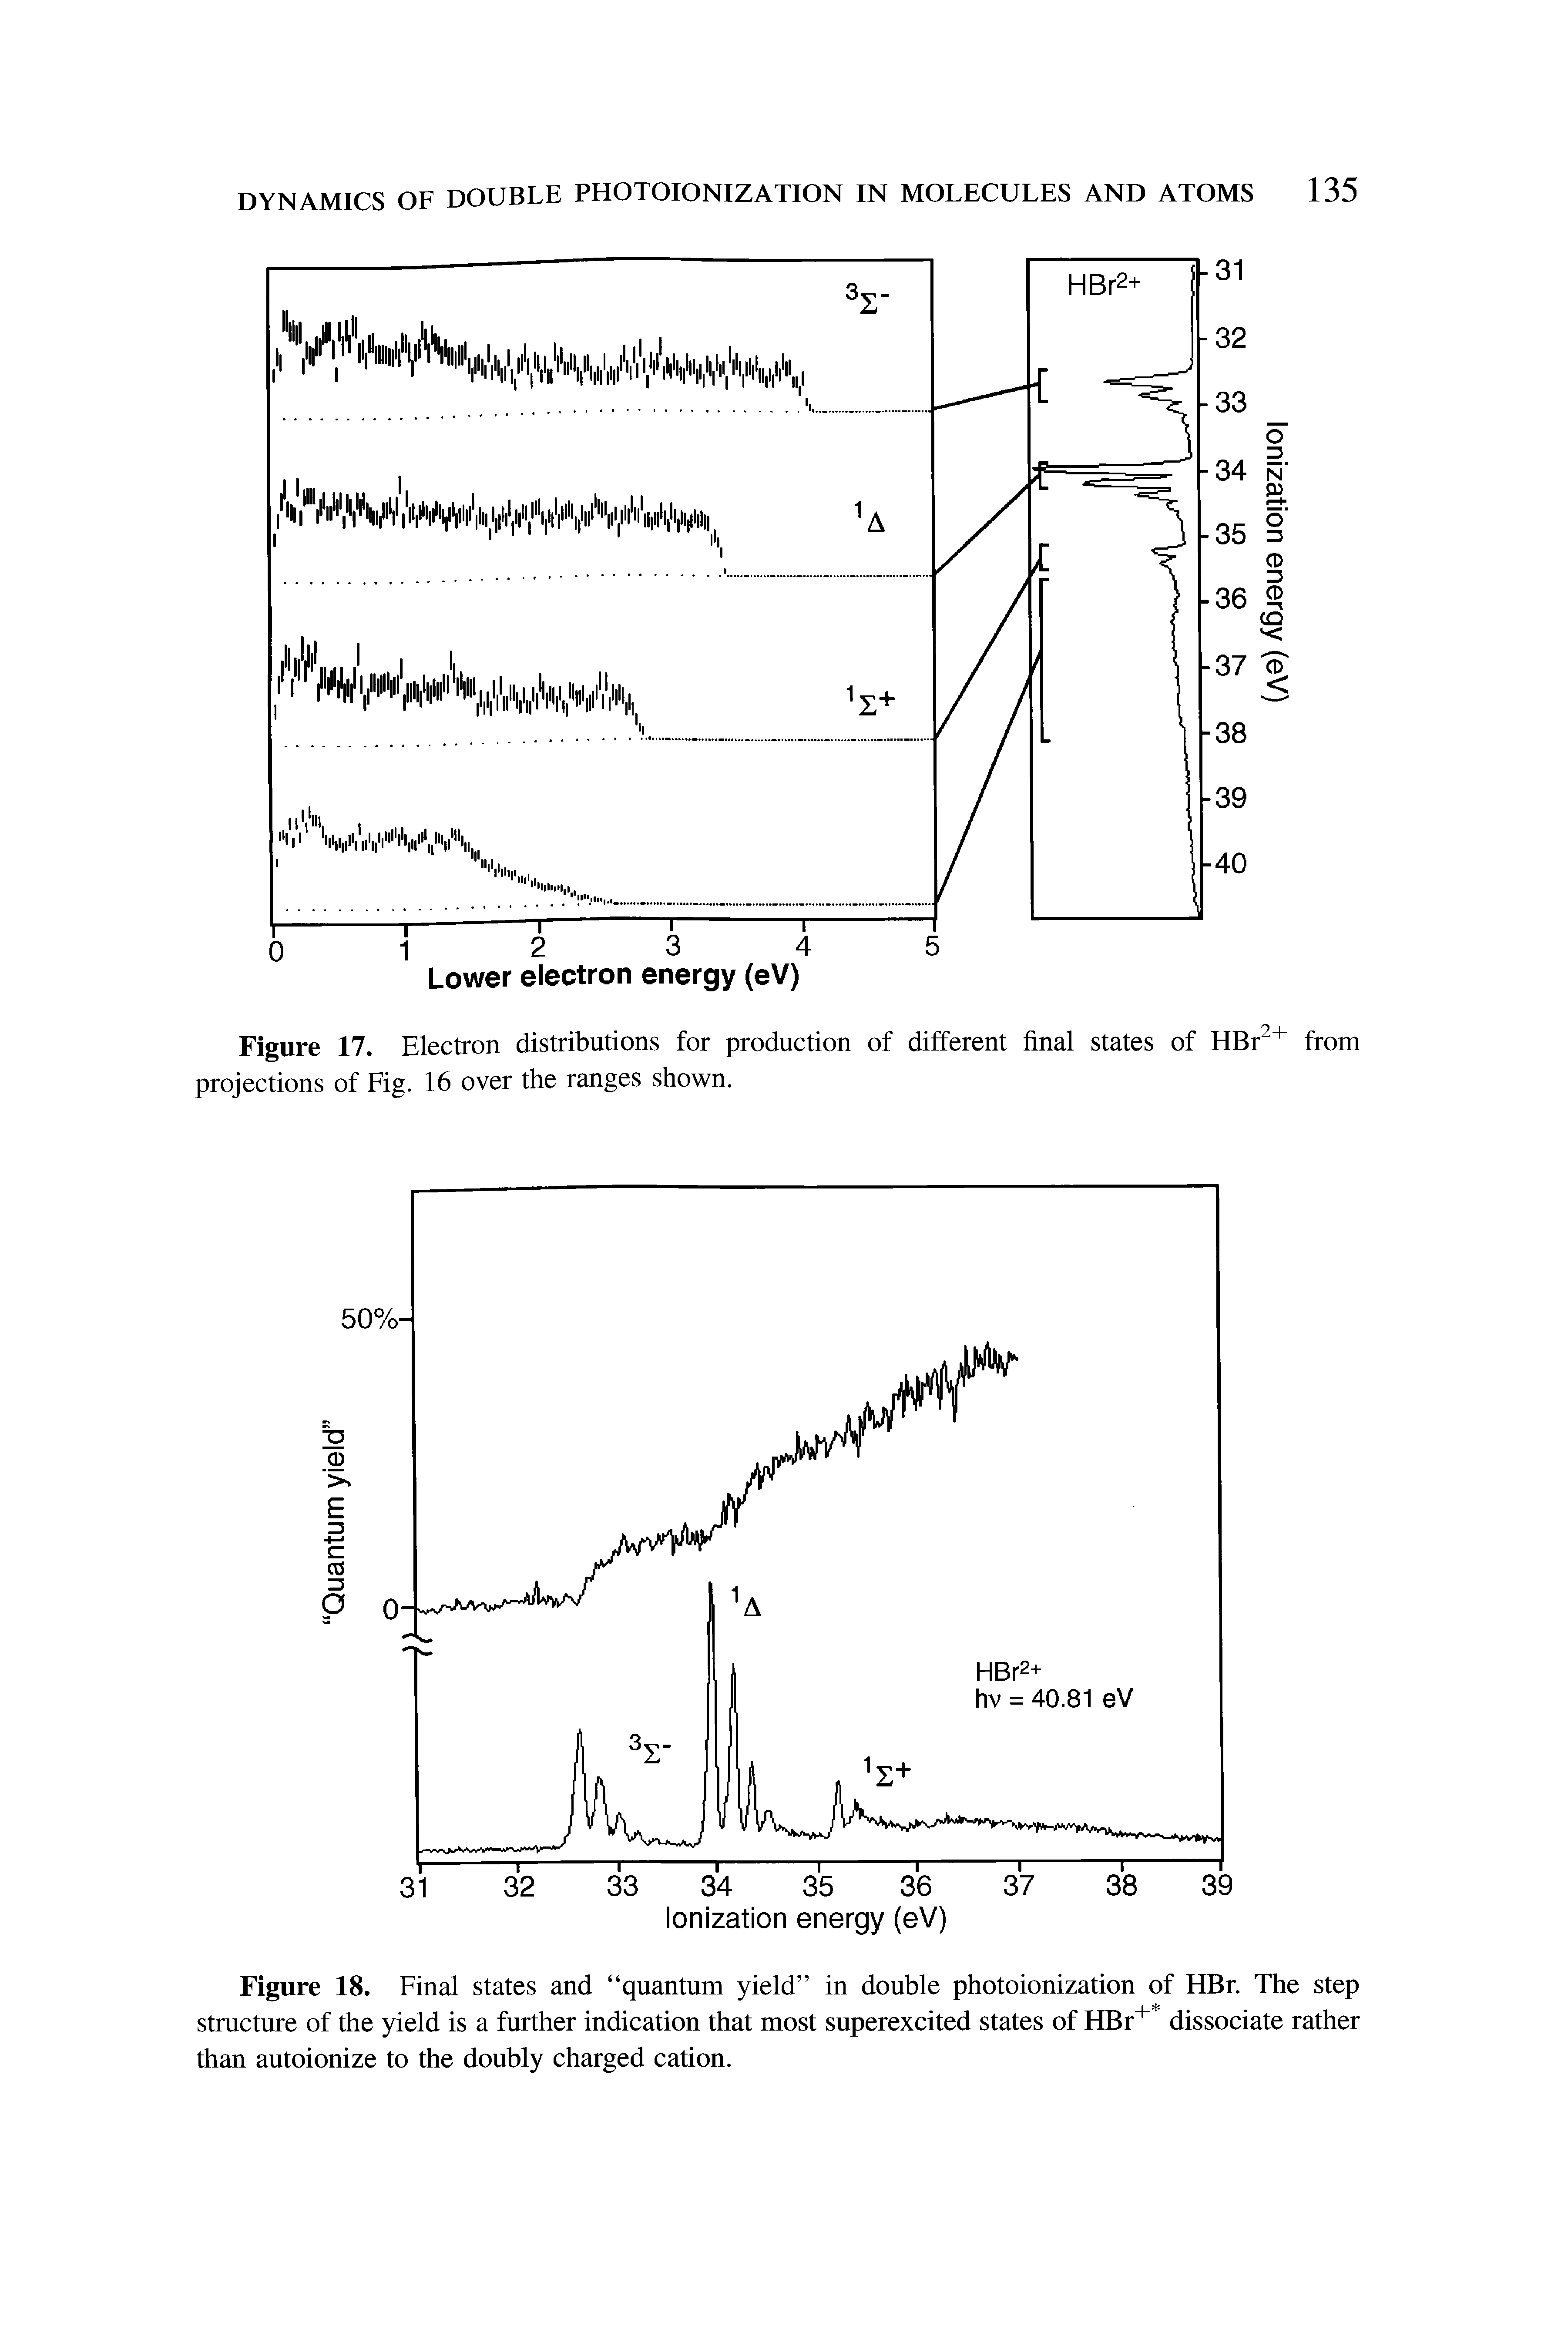 Figure 18. Final states and quantum yield in double photoionization of HBr. The step structure of the yield is a further indication that most superexcited states of HBr+ dissociate rather than autoionize to the doubly charged cation.